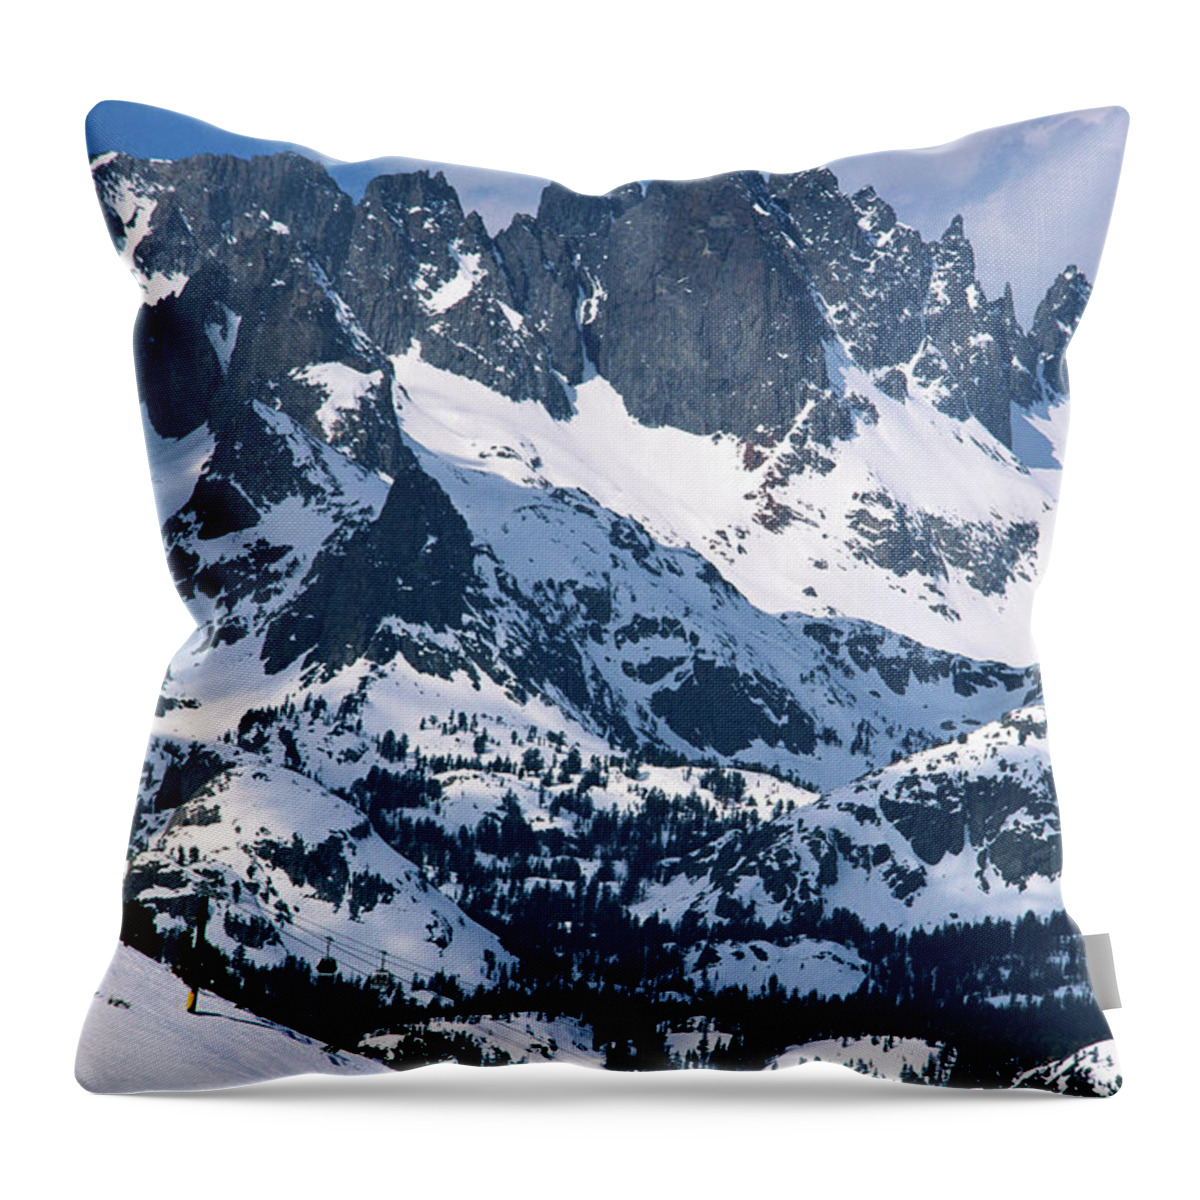 Minarets Throw Pillow featuring the photograph Minarets, Mammoth Mountain Ski Area, Chairlift 18, Mammoth Lakes by Bonnie Colgan